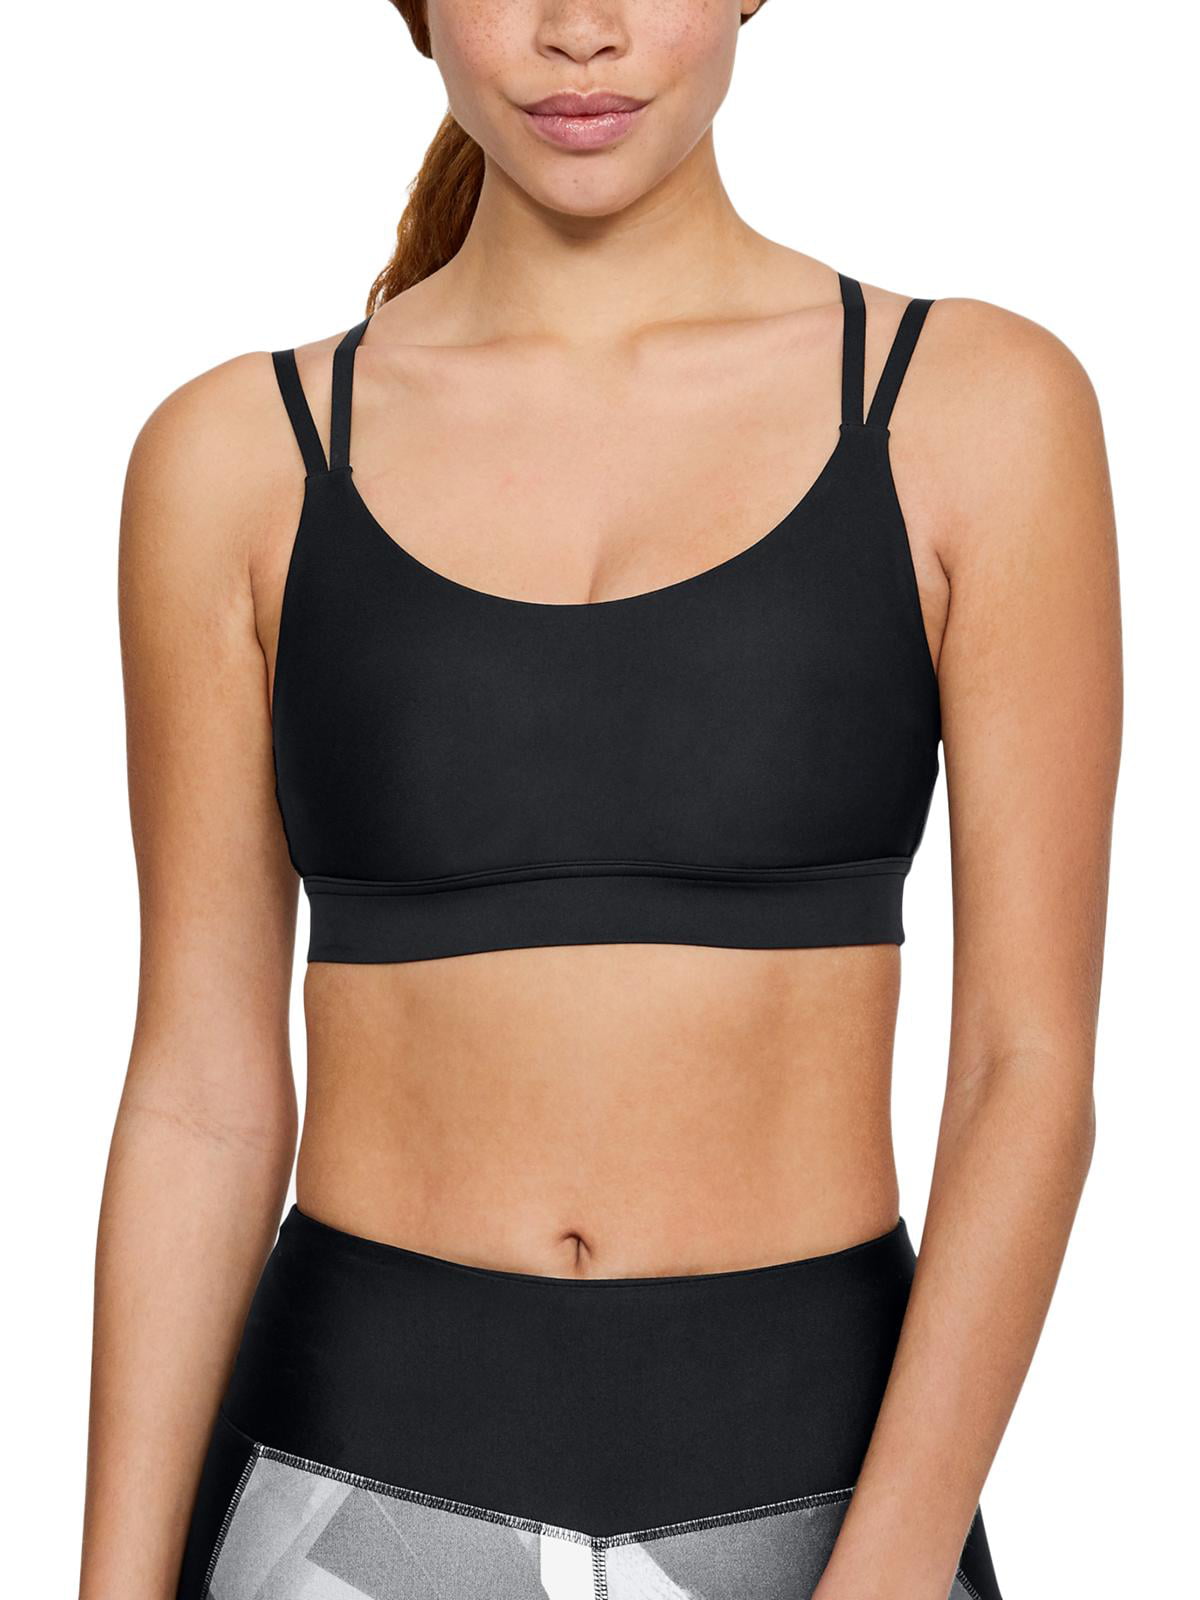 Under Armour Womens Vanish Sports Support Bra Top Black Running Gym Breathable 